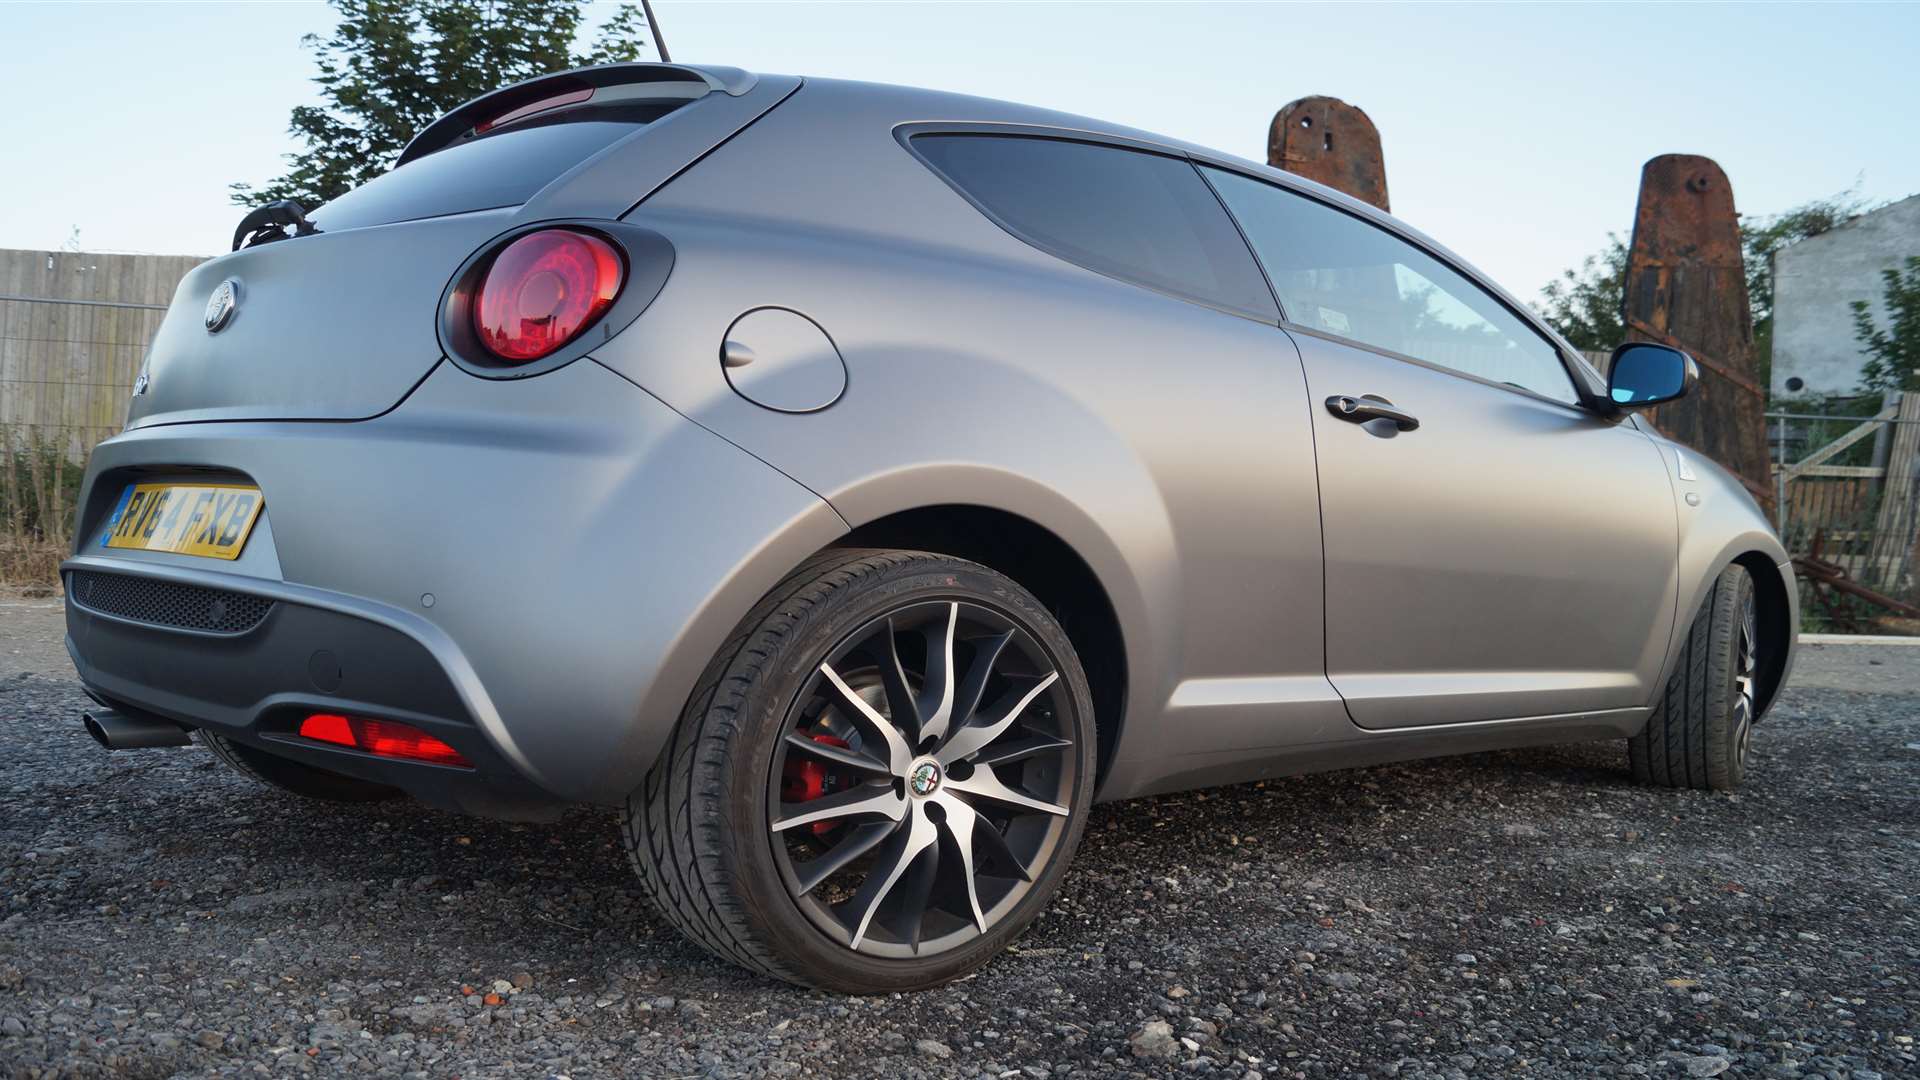 Special 18in alloy wheels help set the Mito QV apart